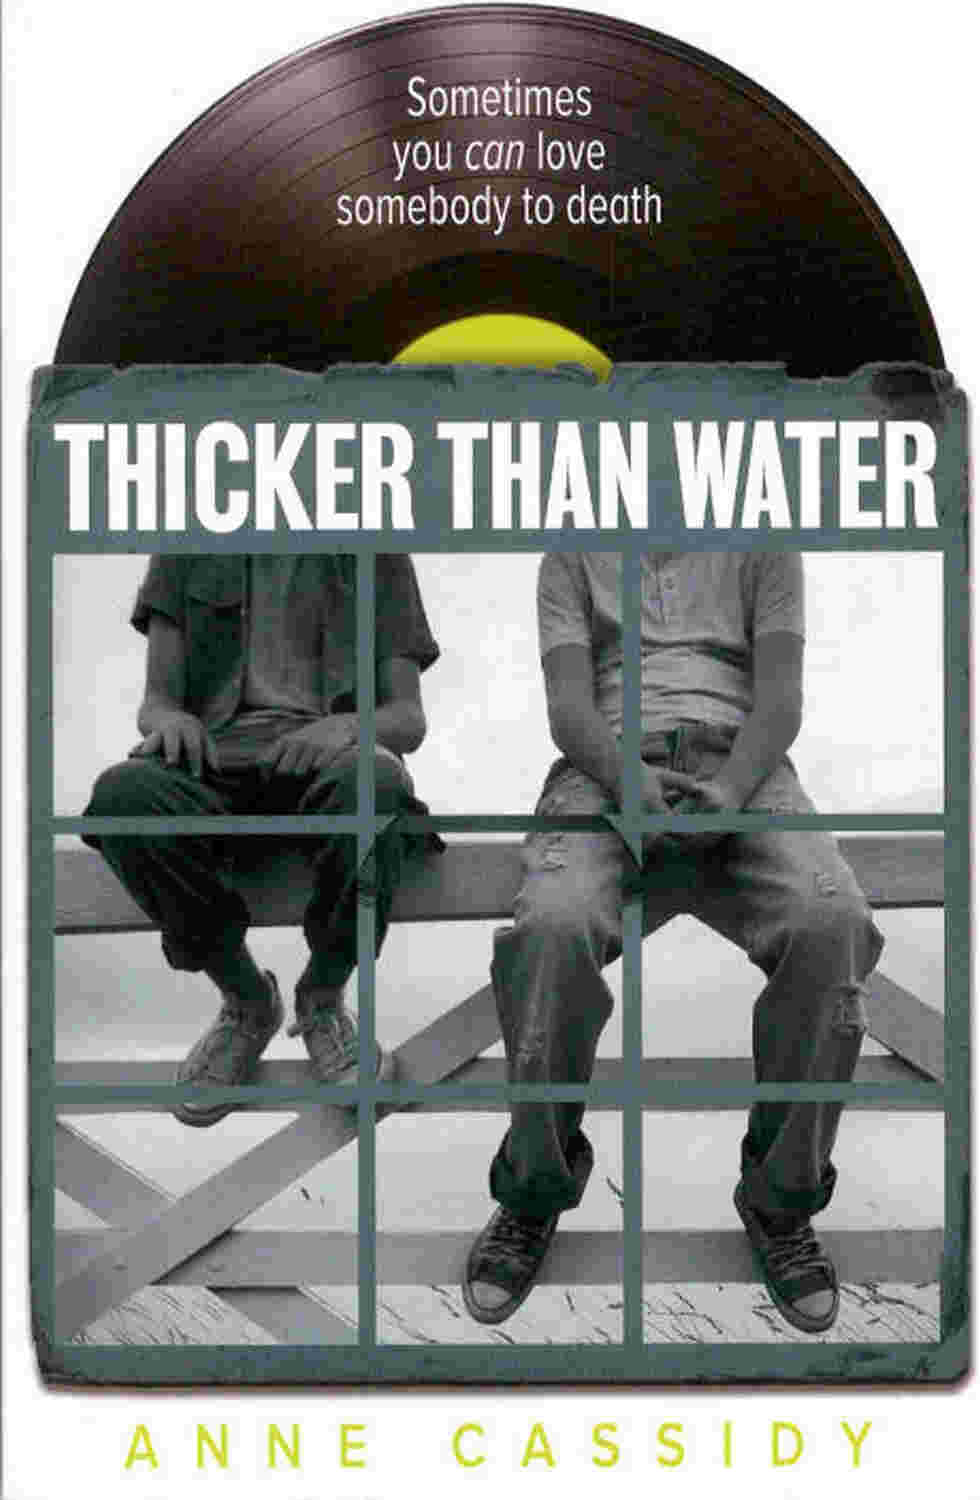 Thicker than water